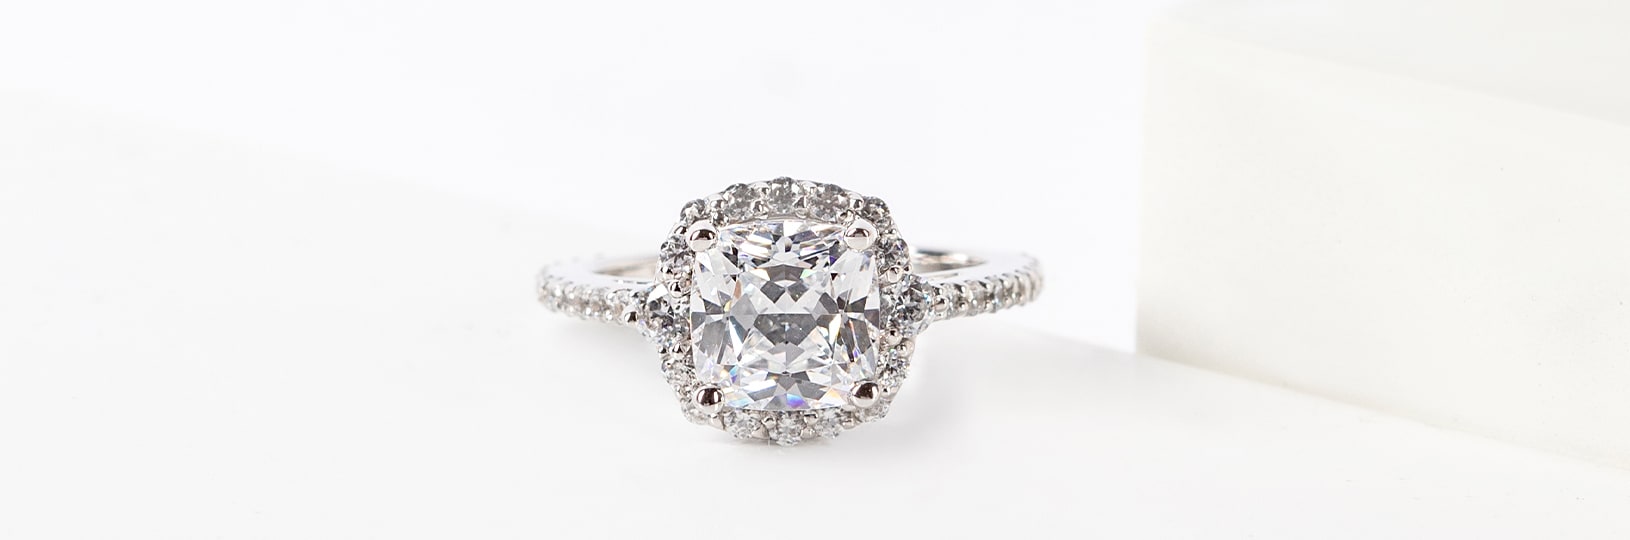 A halo engagement ring in a white gold setting